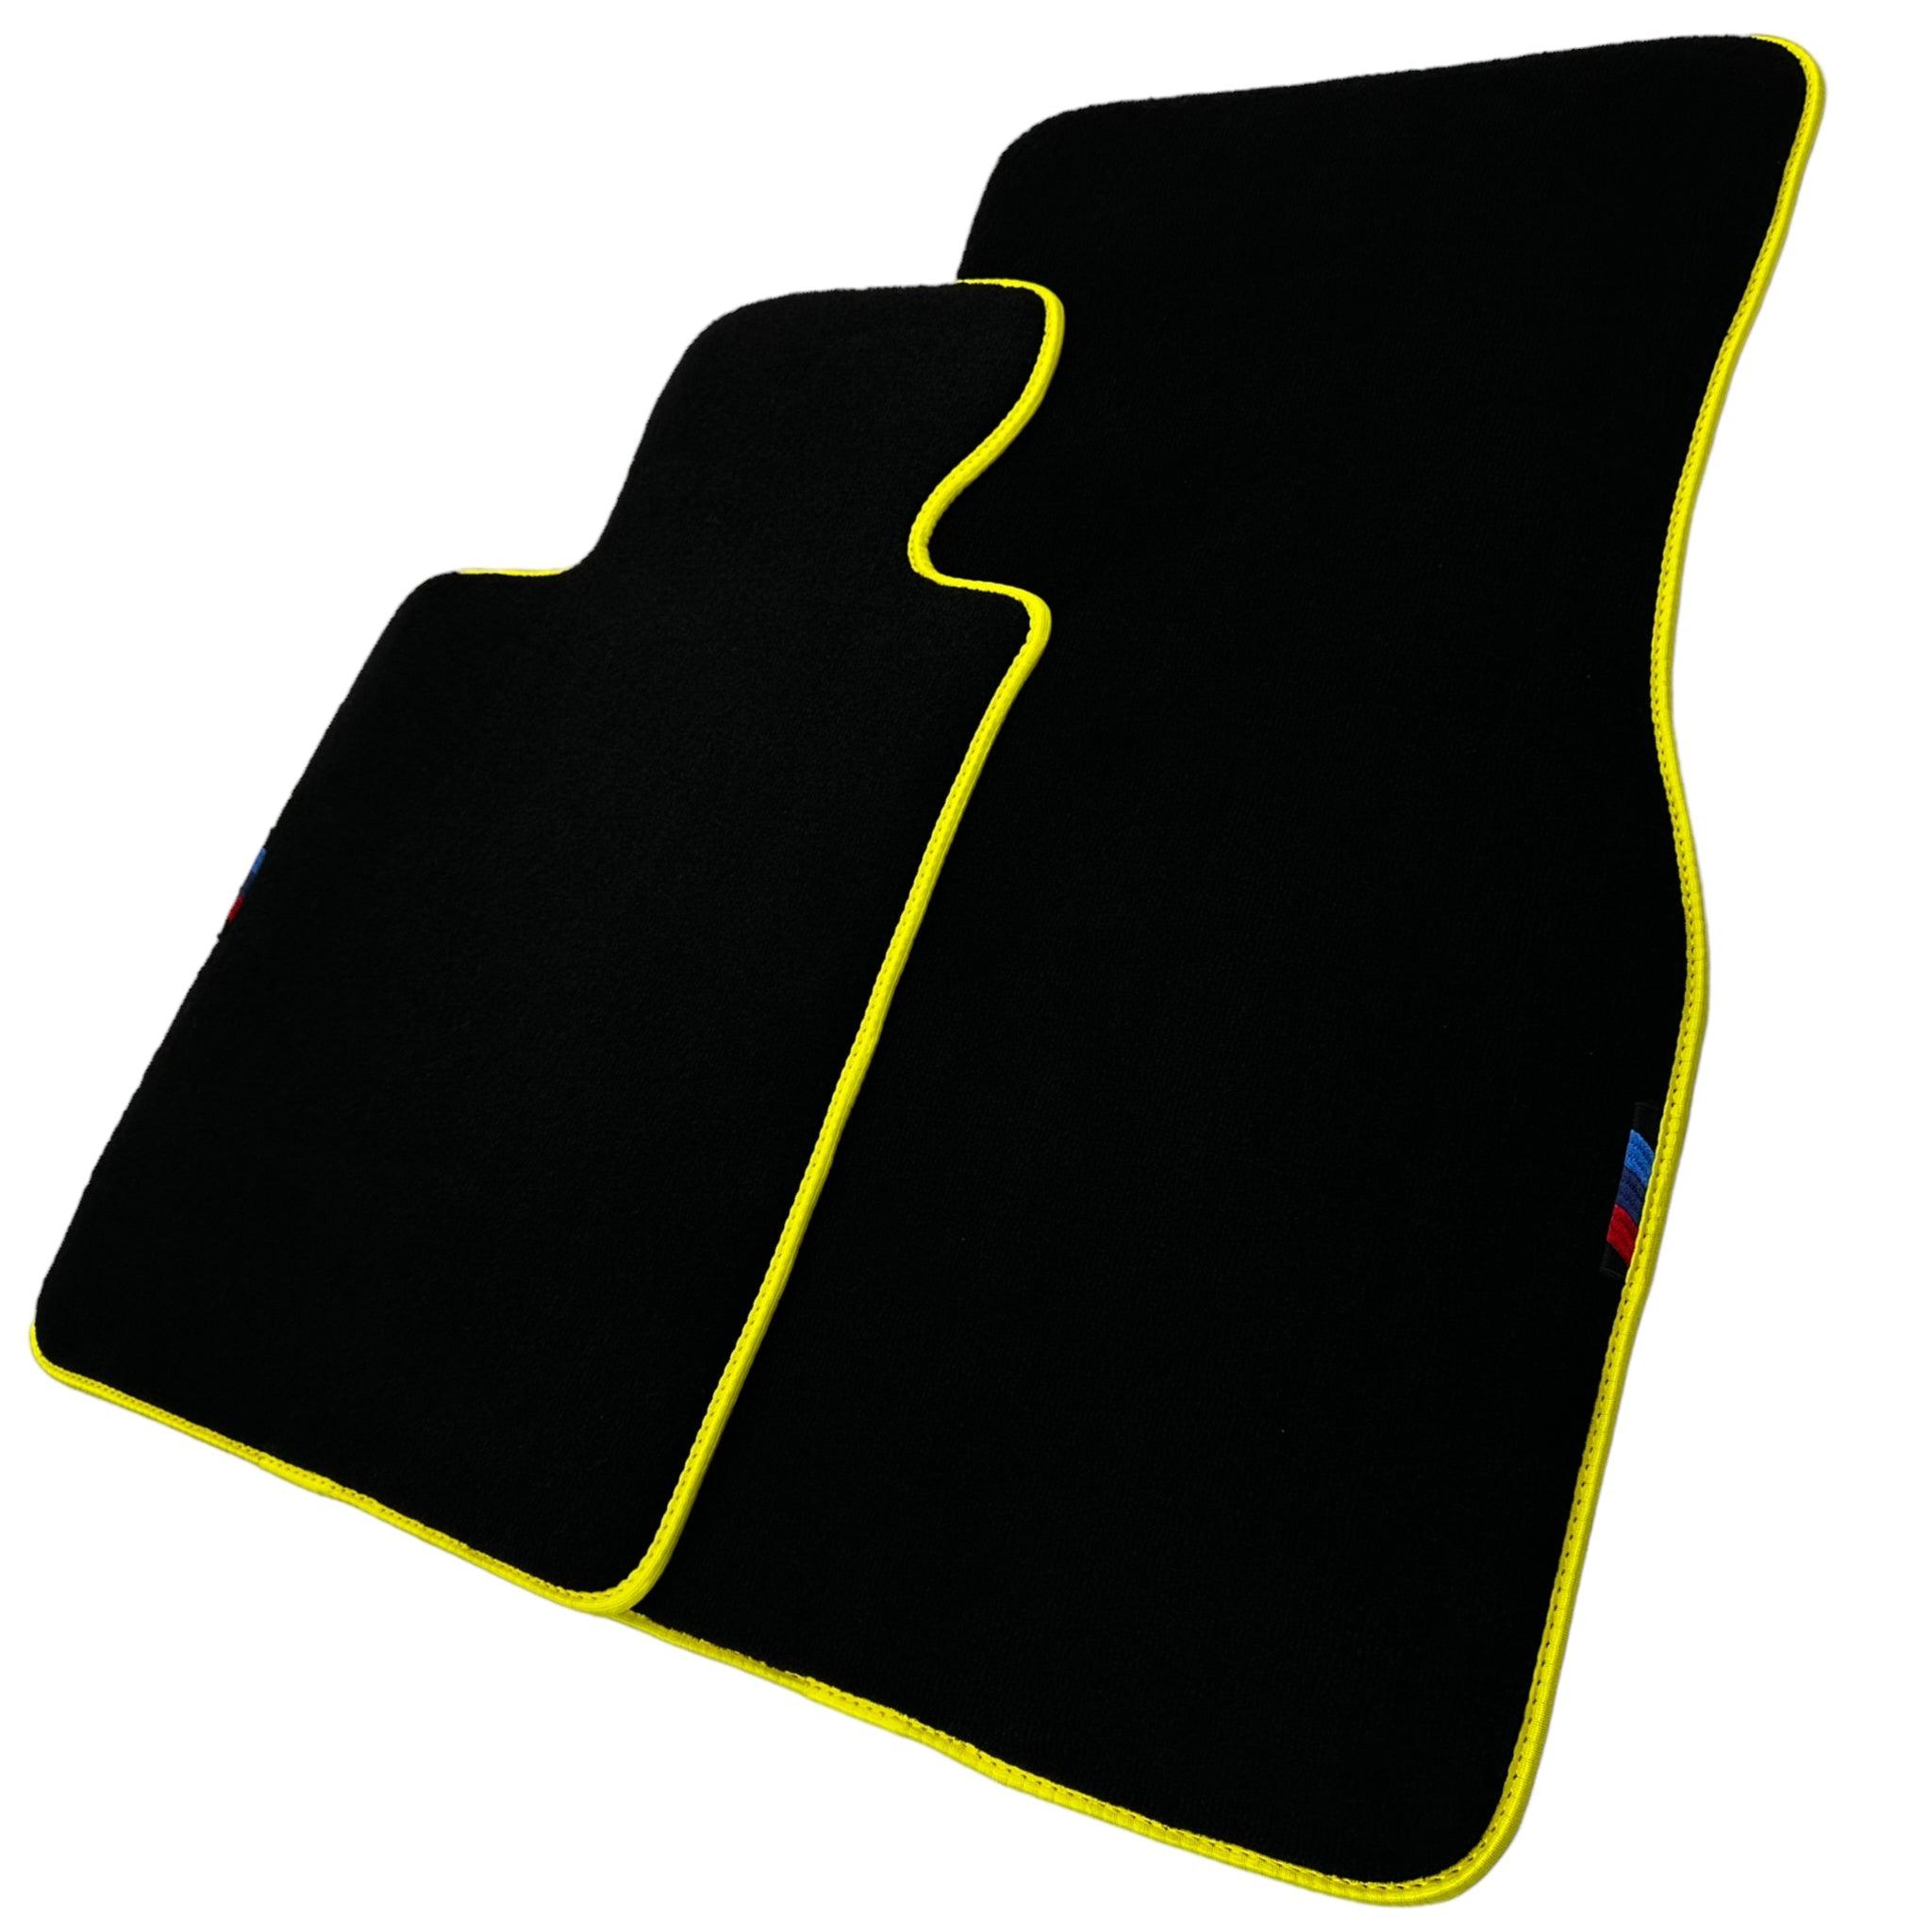 Black Floor Mats For BMW M3 E36 | Fighter Jet Edition | Yellow Trim